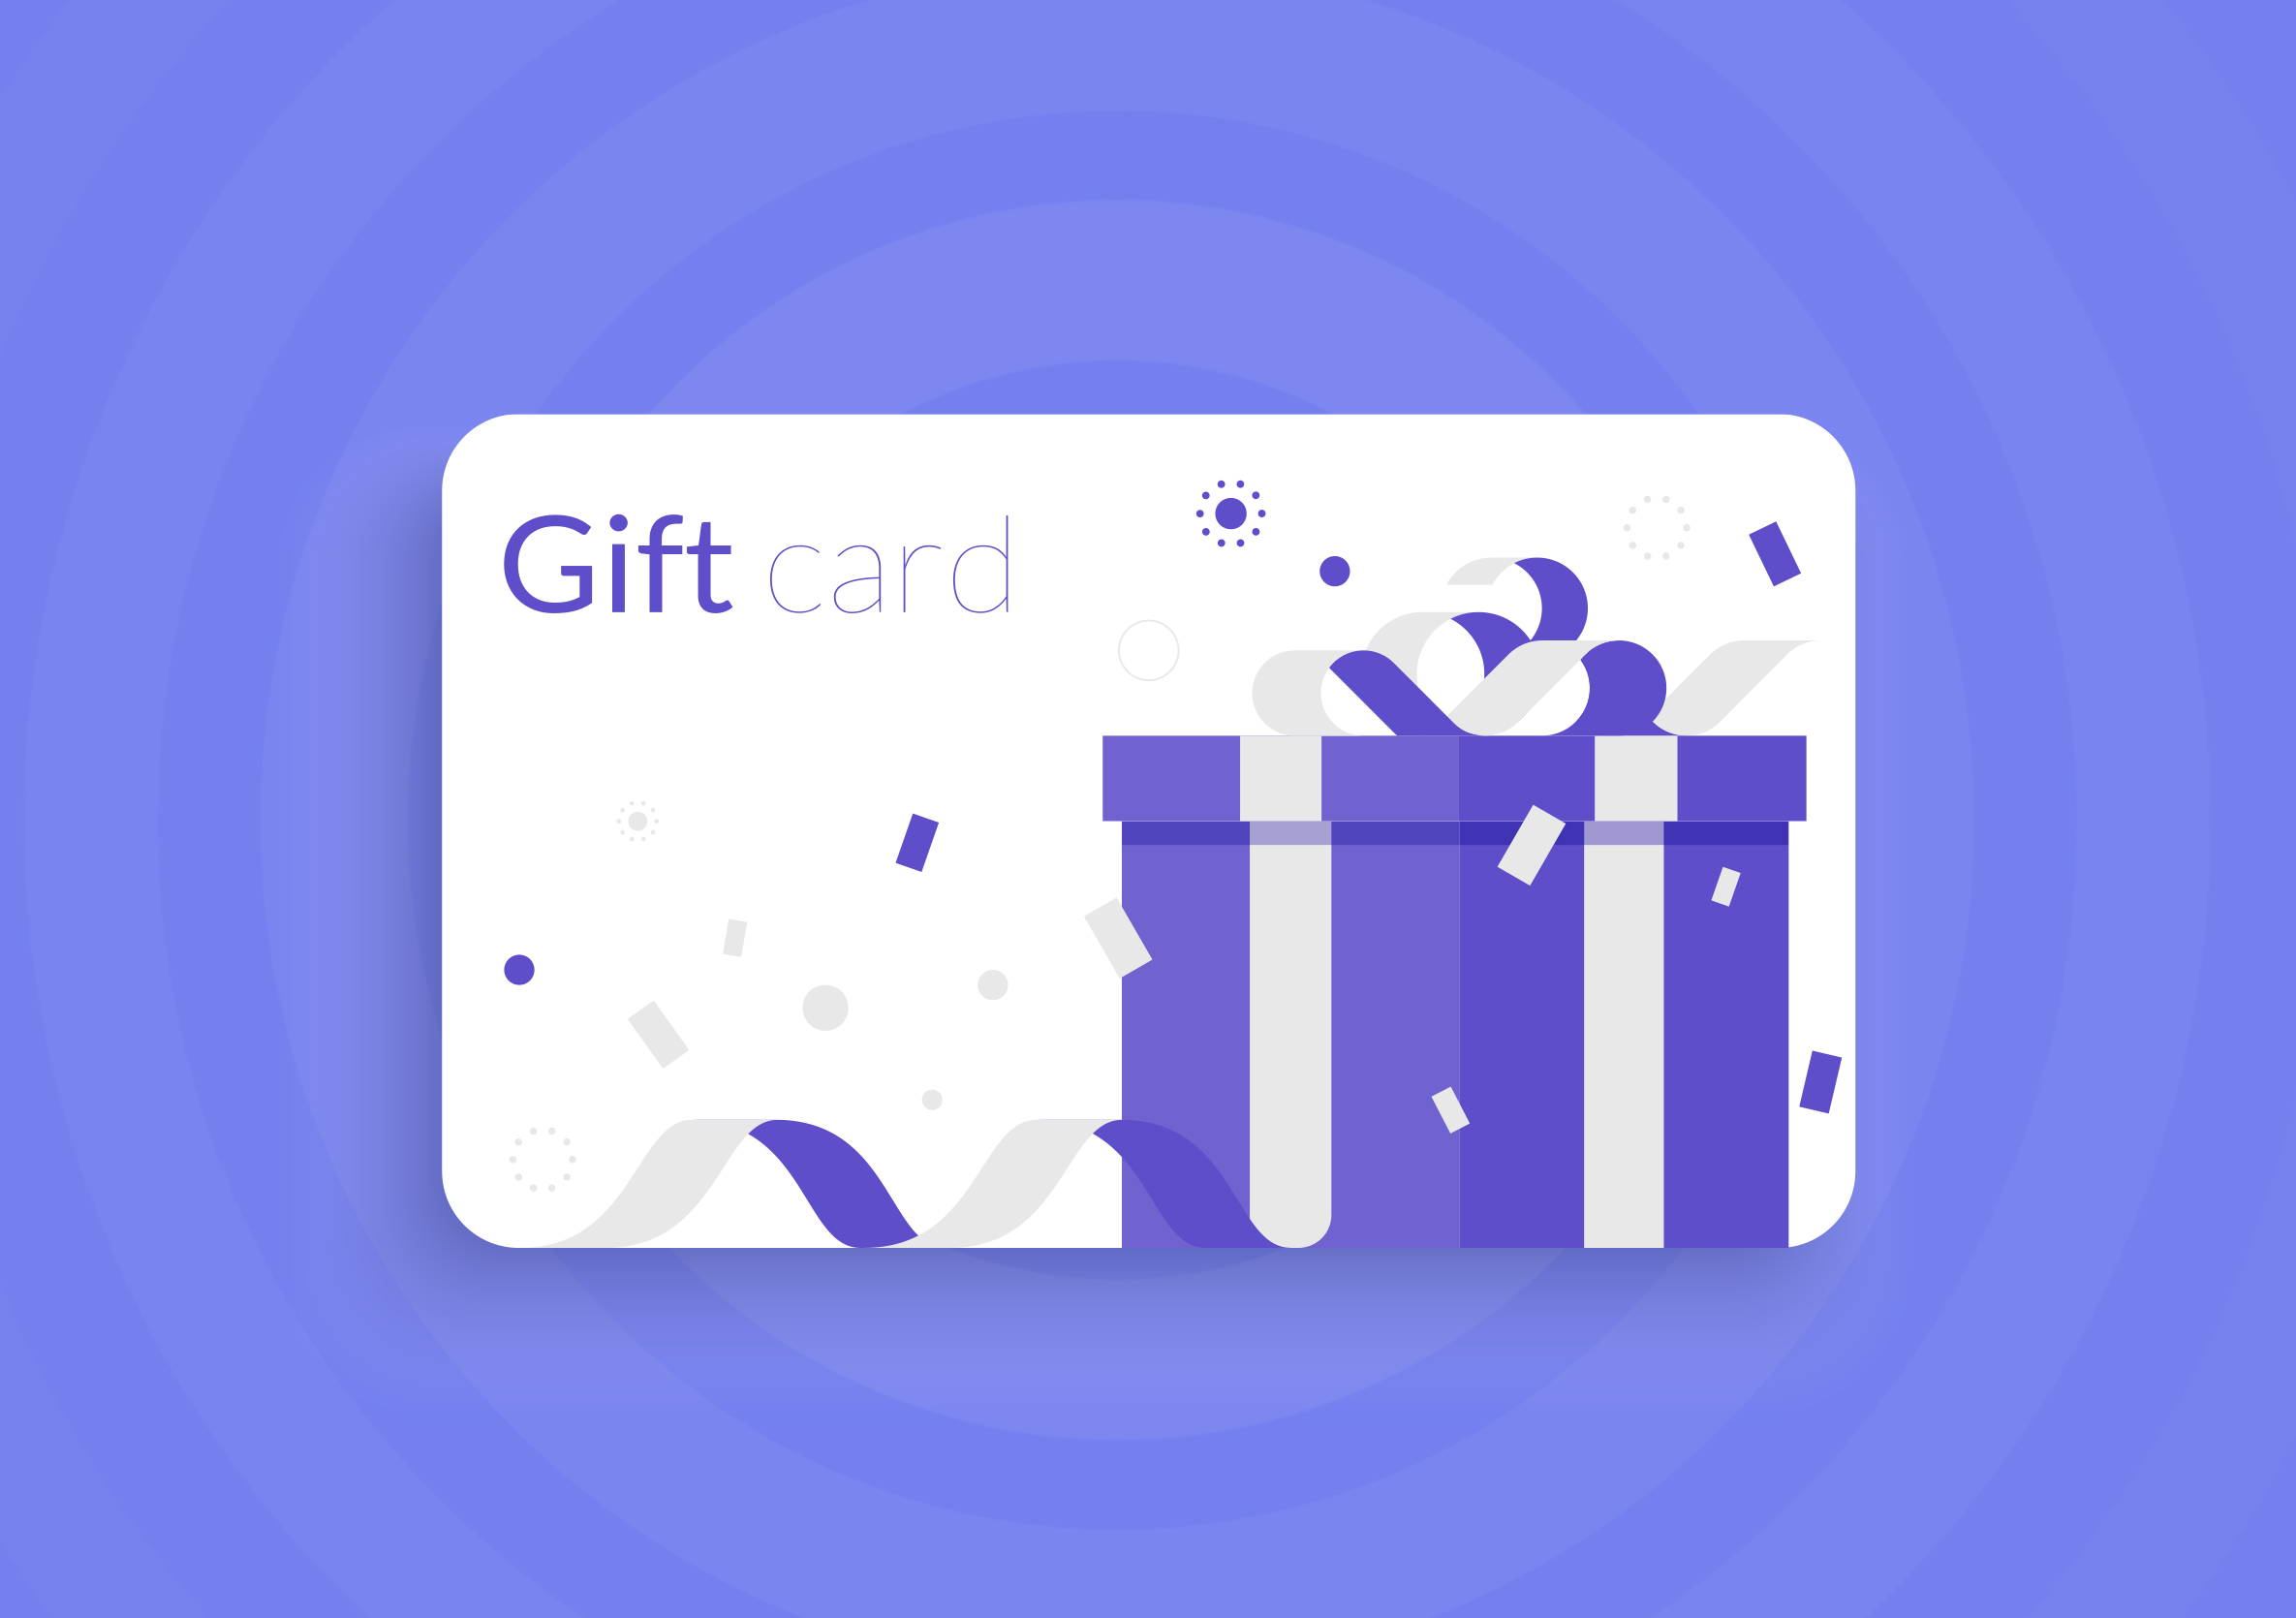 gift cards image